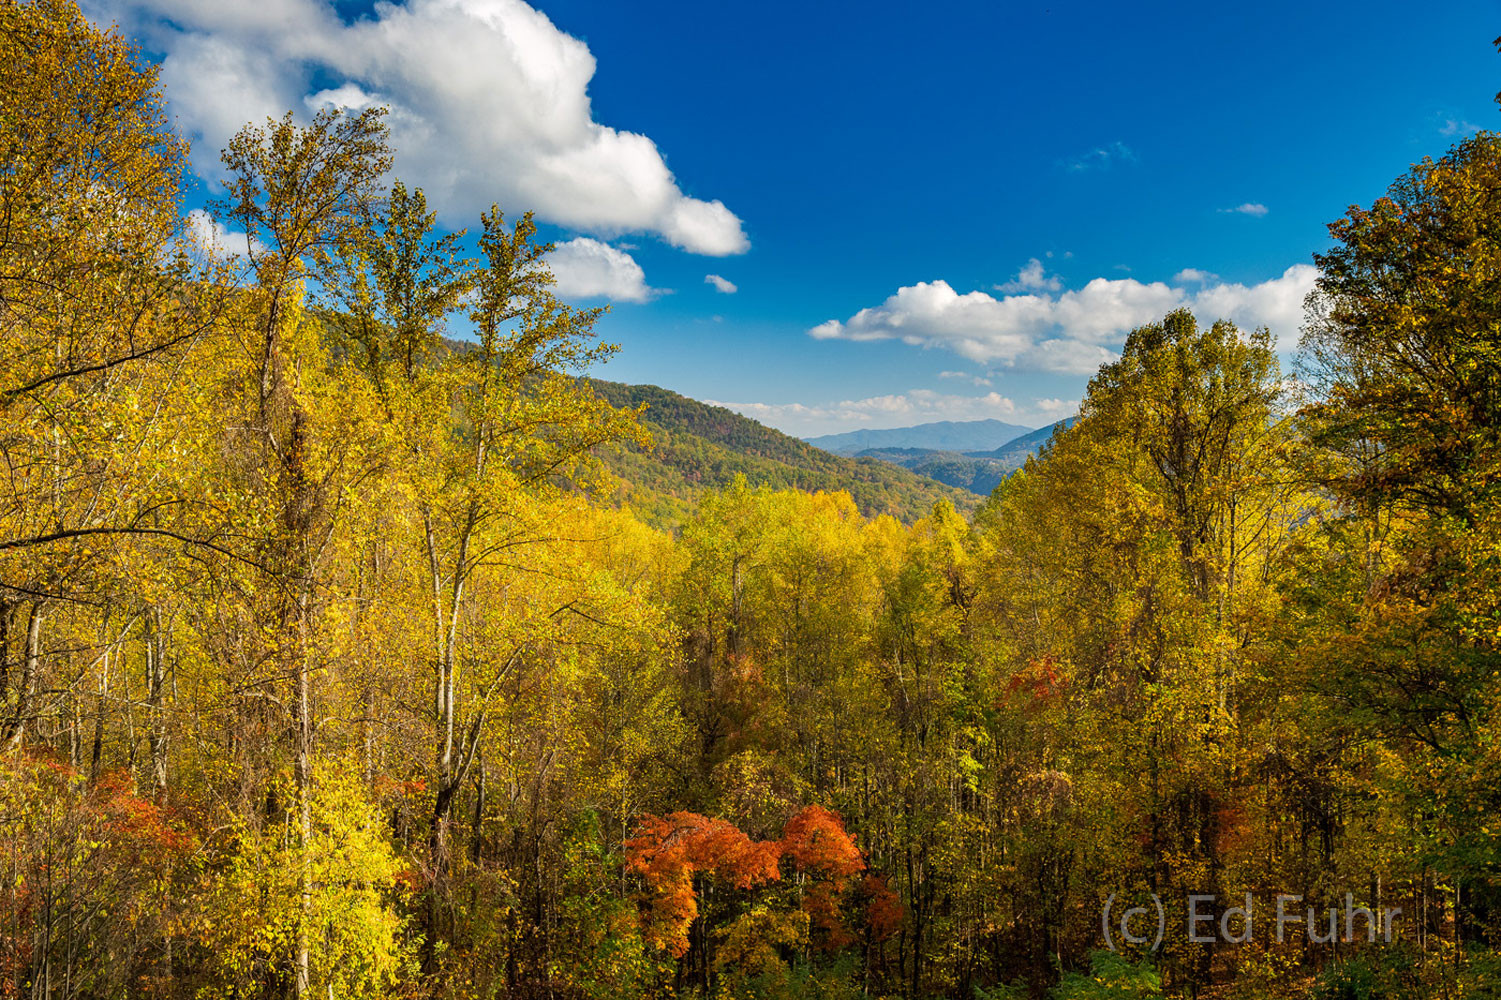 Mahoney Overlook offers colorful autumn views to east.